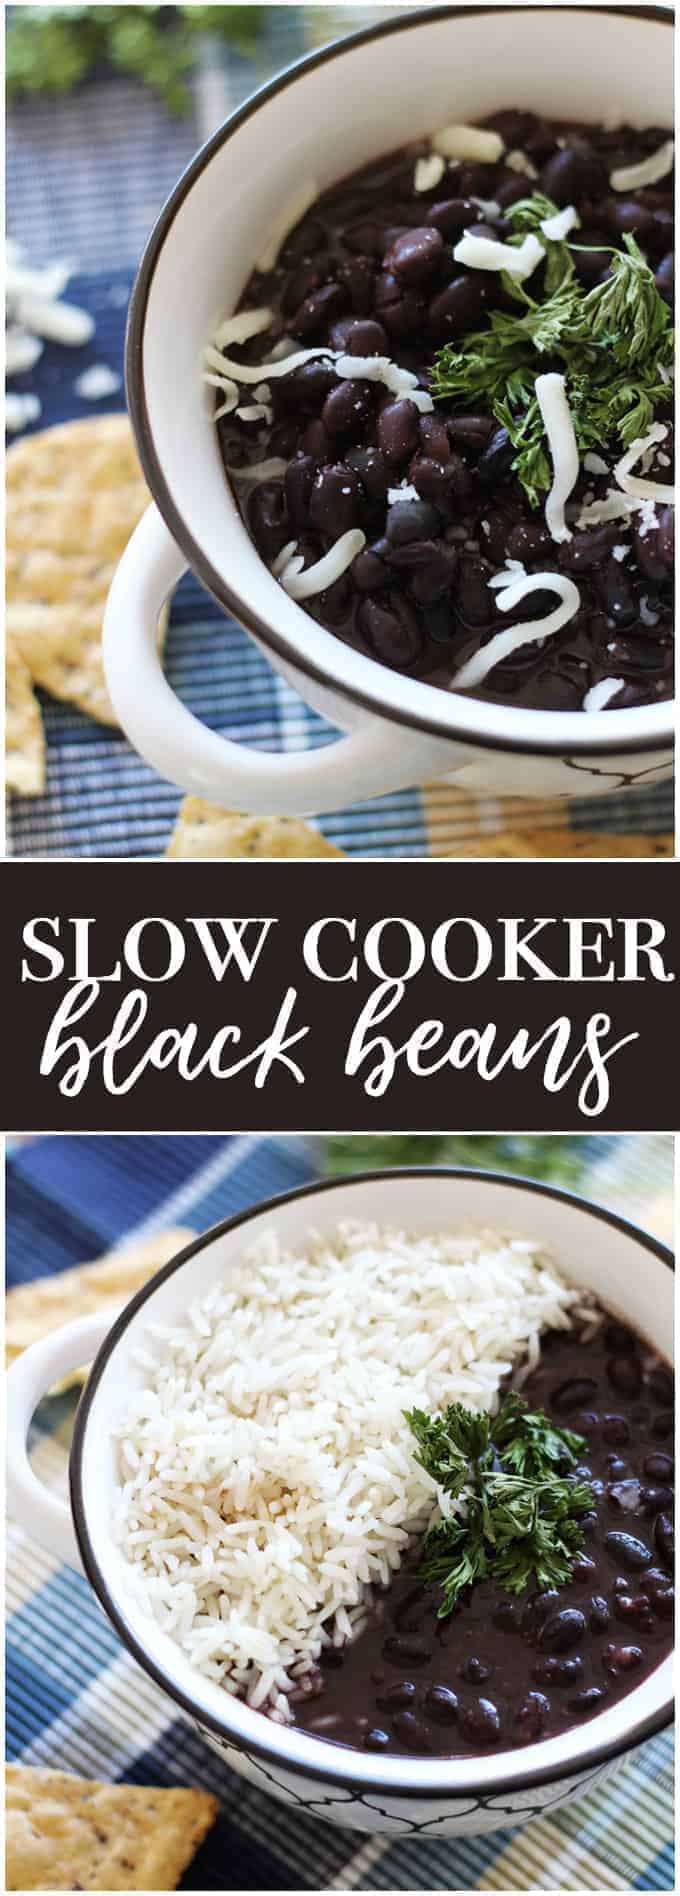 Slow Cooker Black Beans - Make the best dried black beans in the Crockpot! This bean recipe requires no soaking and simmers all day while you're at work for the easiest Taco Tuesday side dish.